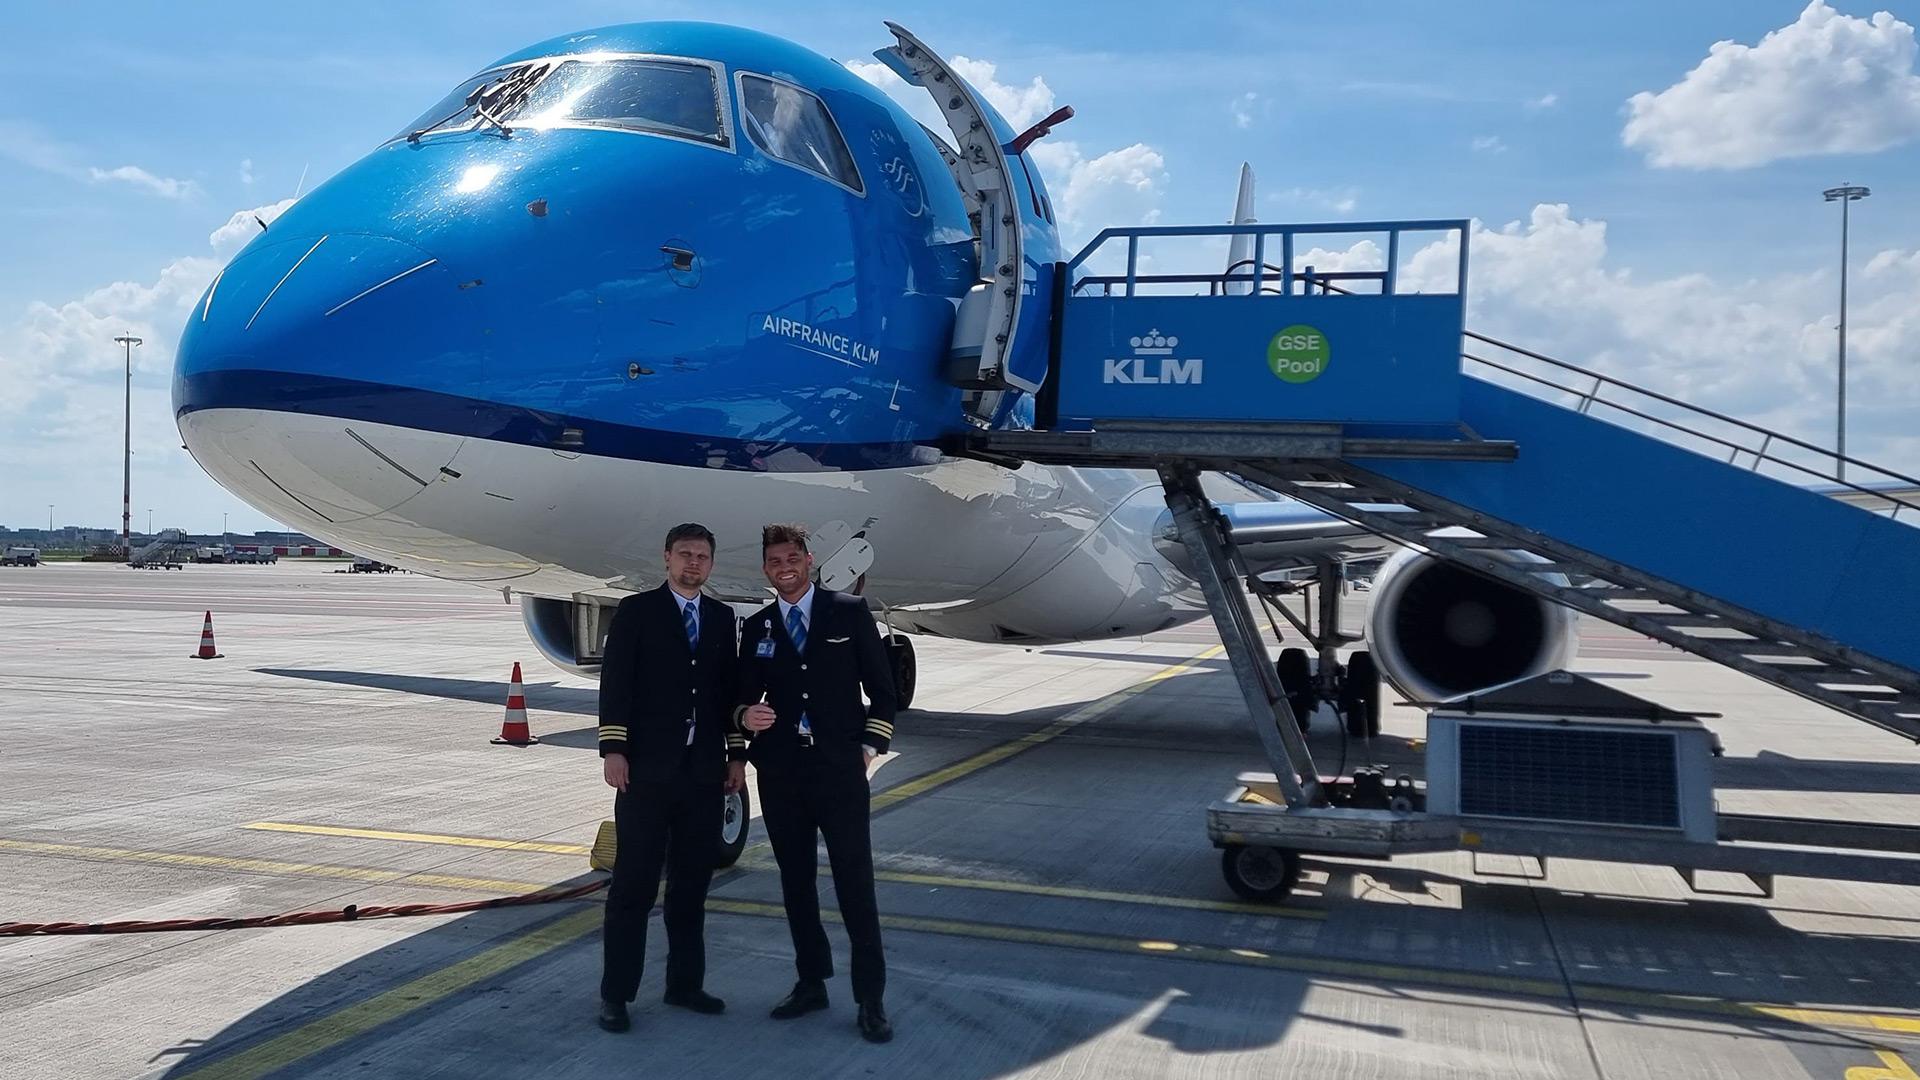 Miguel in front of his KLM Embraer!